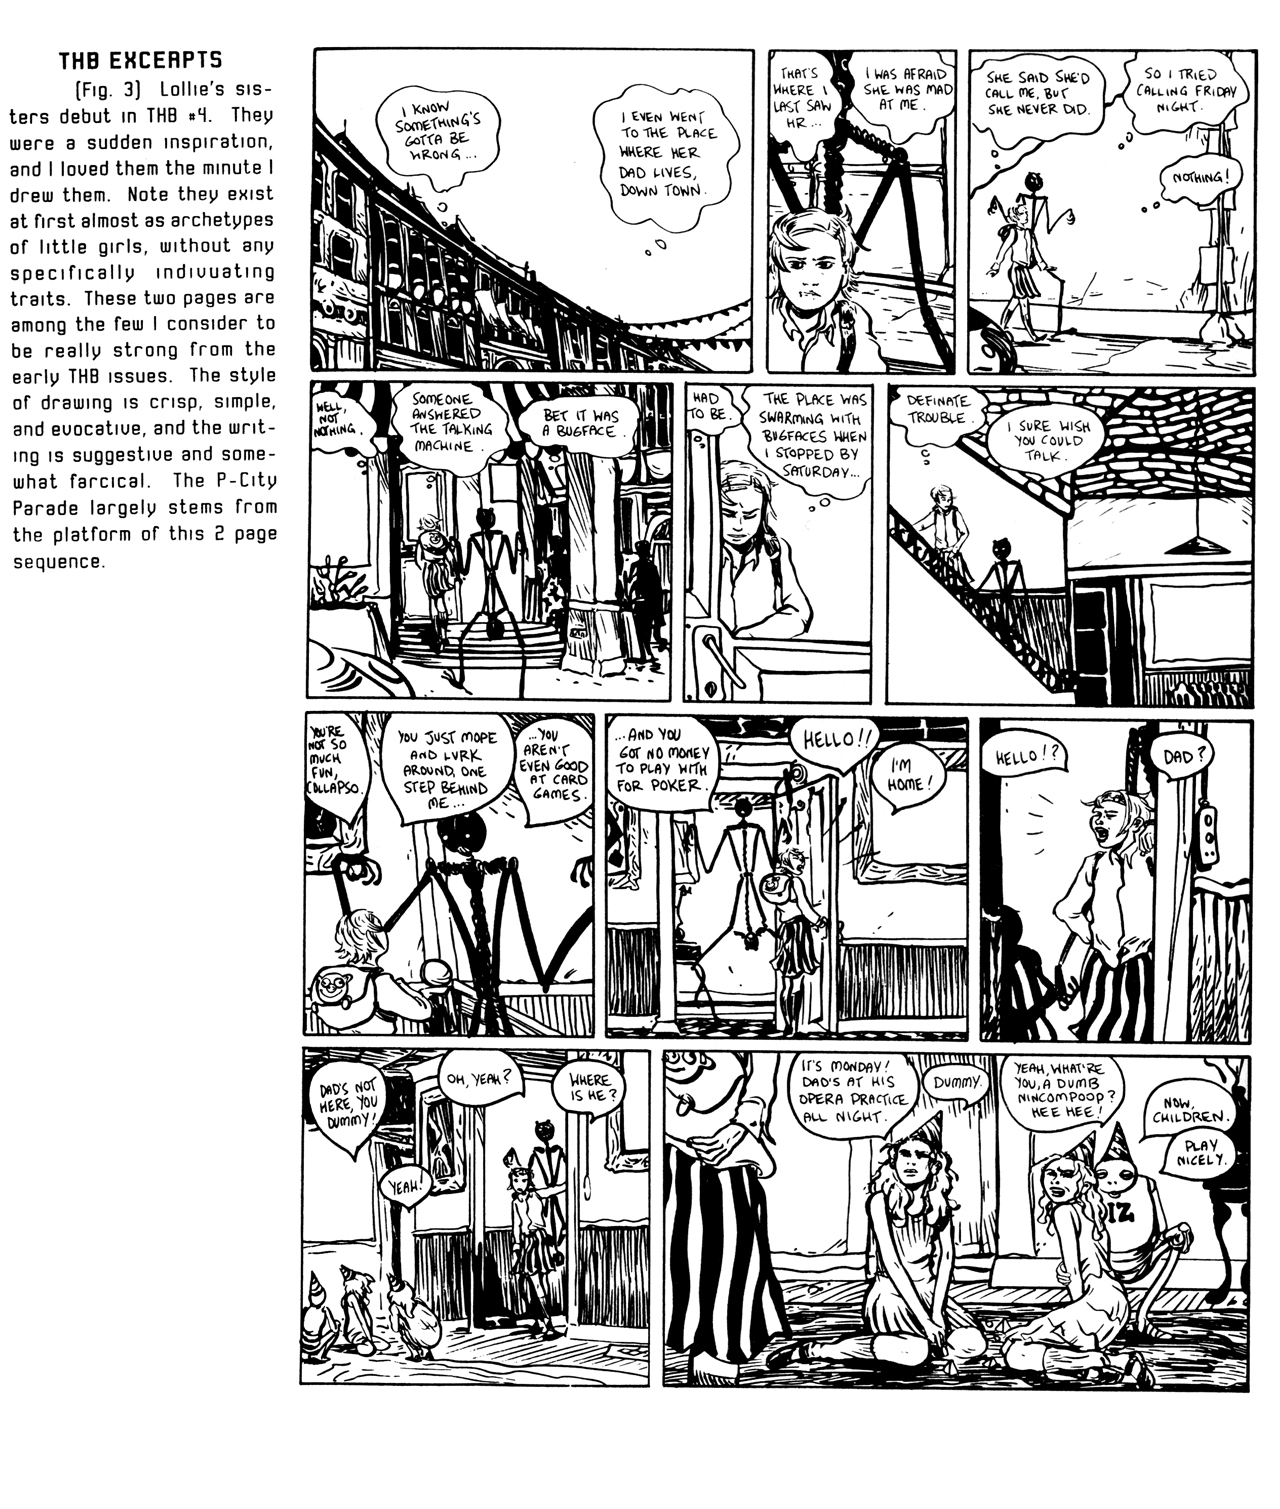 Read online p city parade comic -  Issue # Full - 22